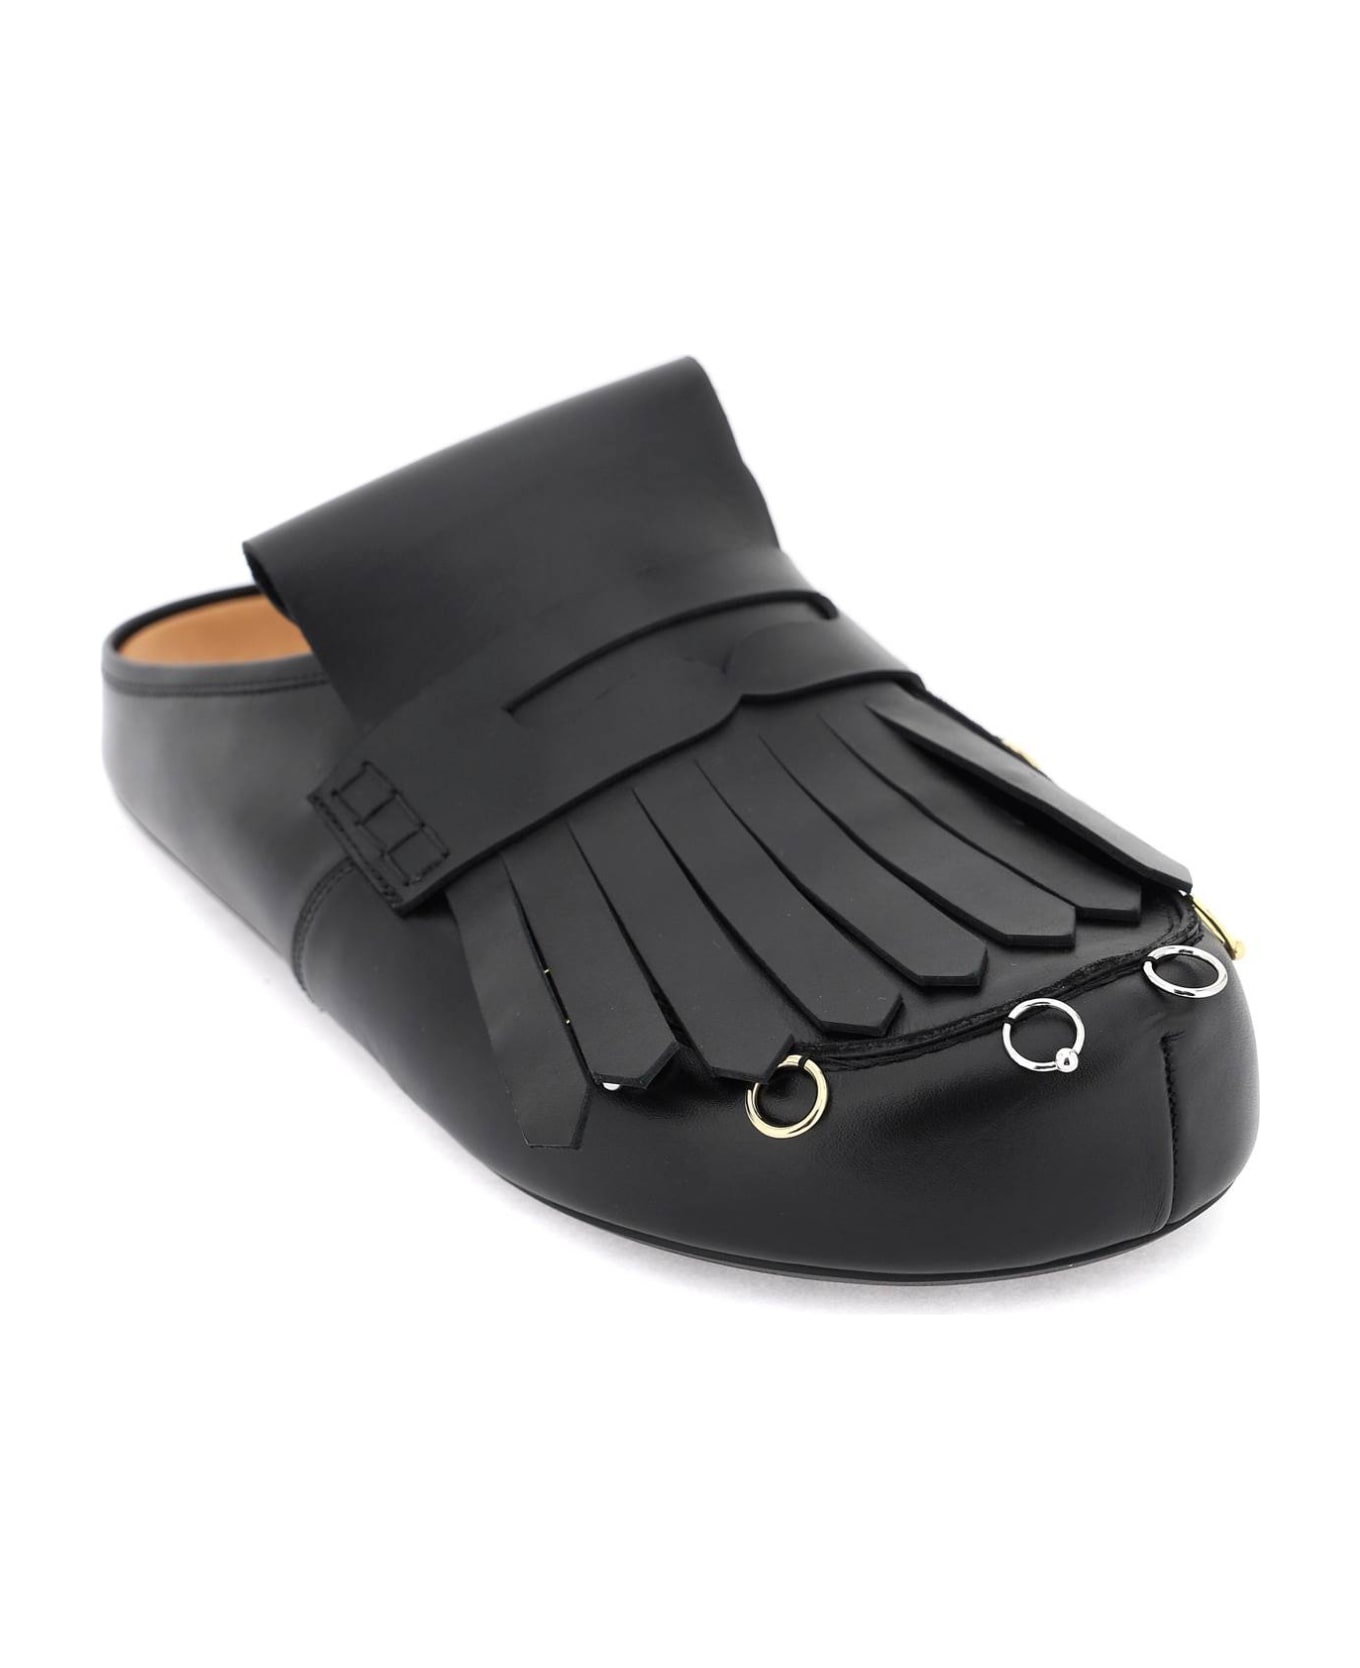 Leather Clogs With Bangs And Piercings - 4